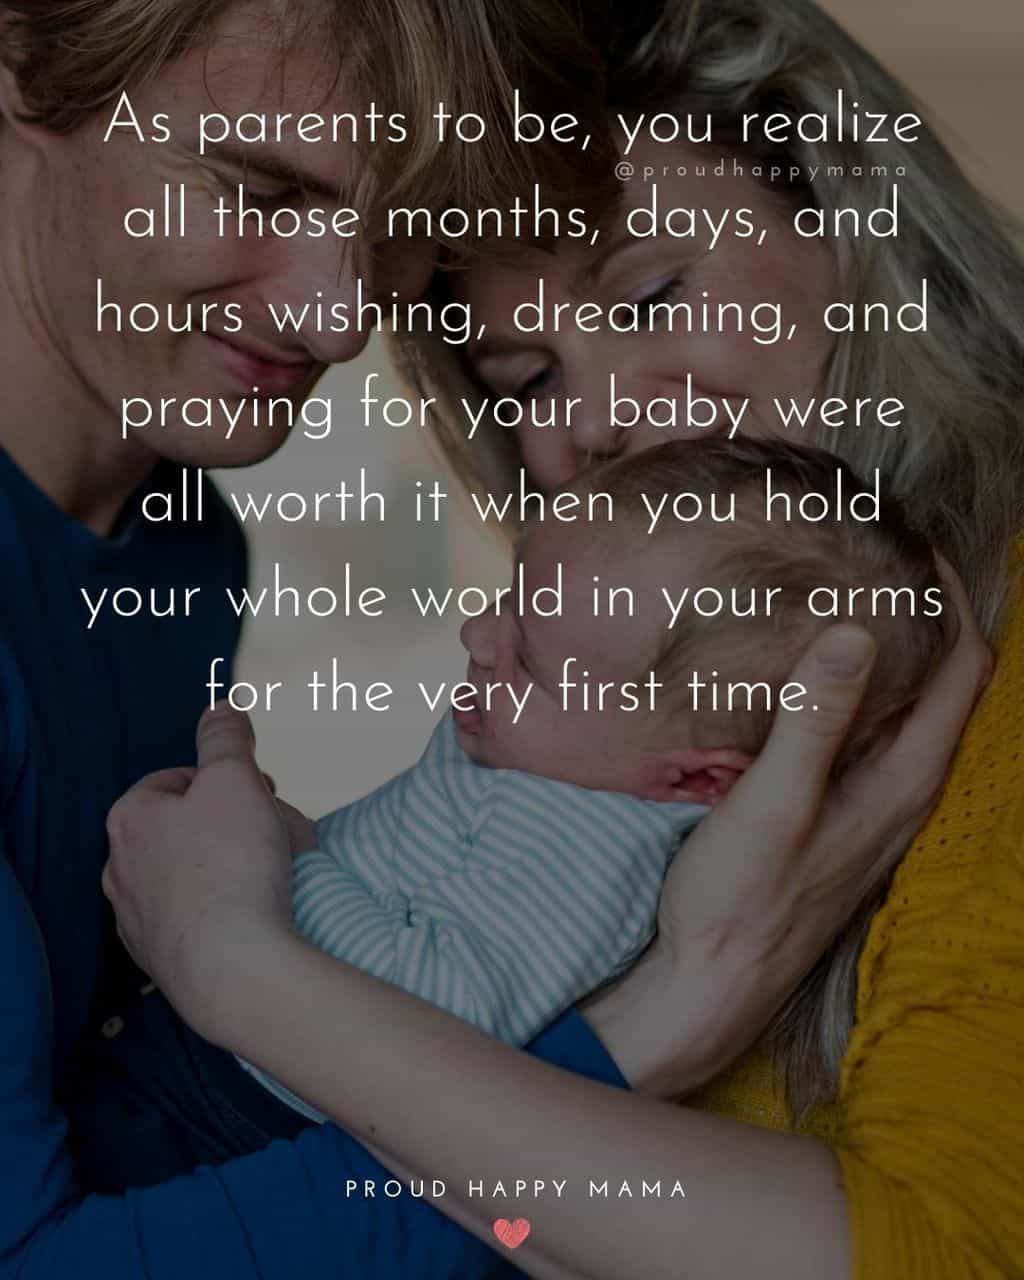 50+ BEST Inspirational Quotes For New Parents [With Images]